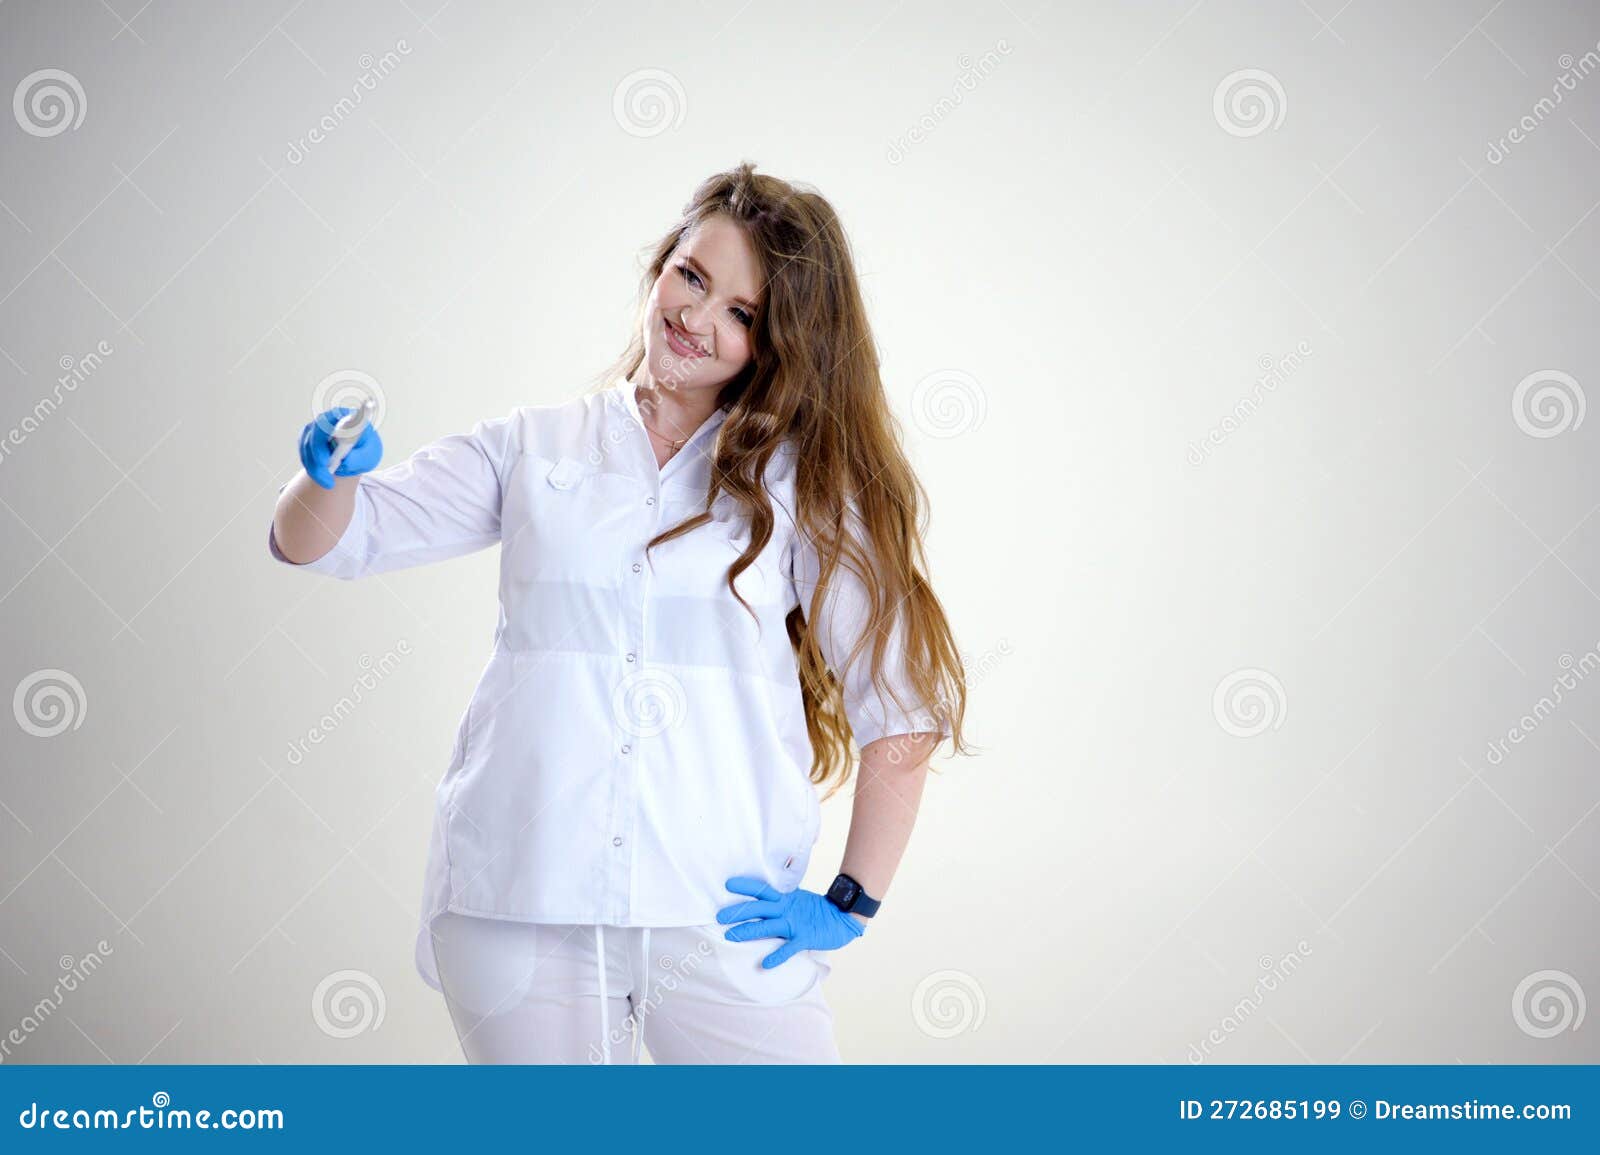 doctor with a magic wand in blue latex gloves loose hair conjures up a treatment. invents treatments advertisements for